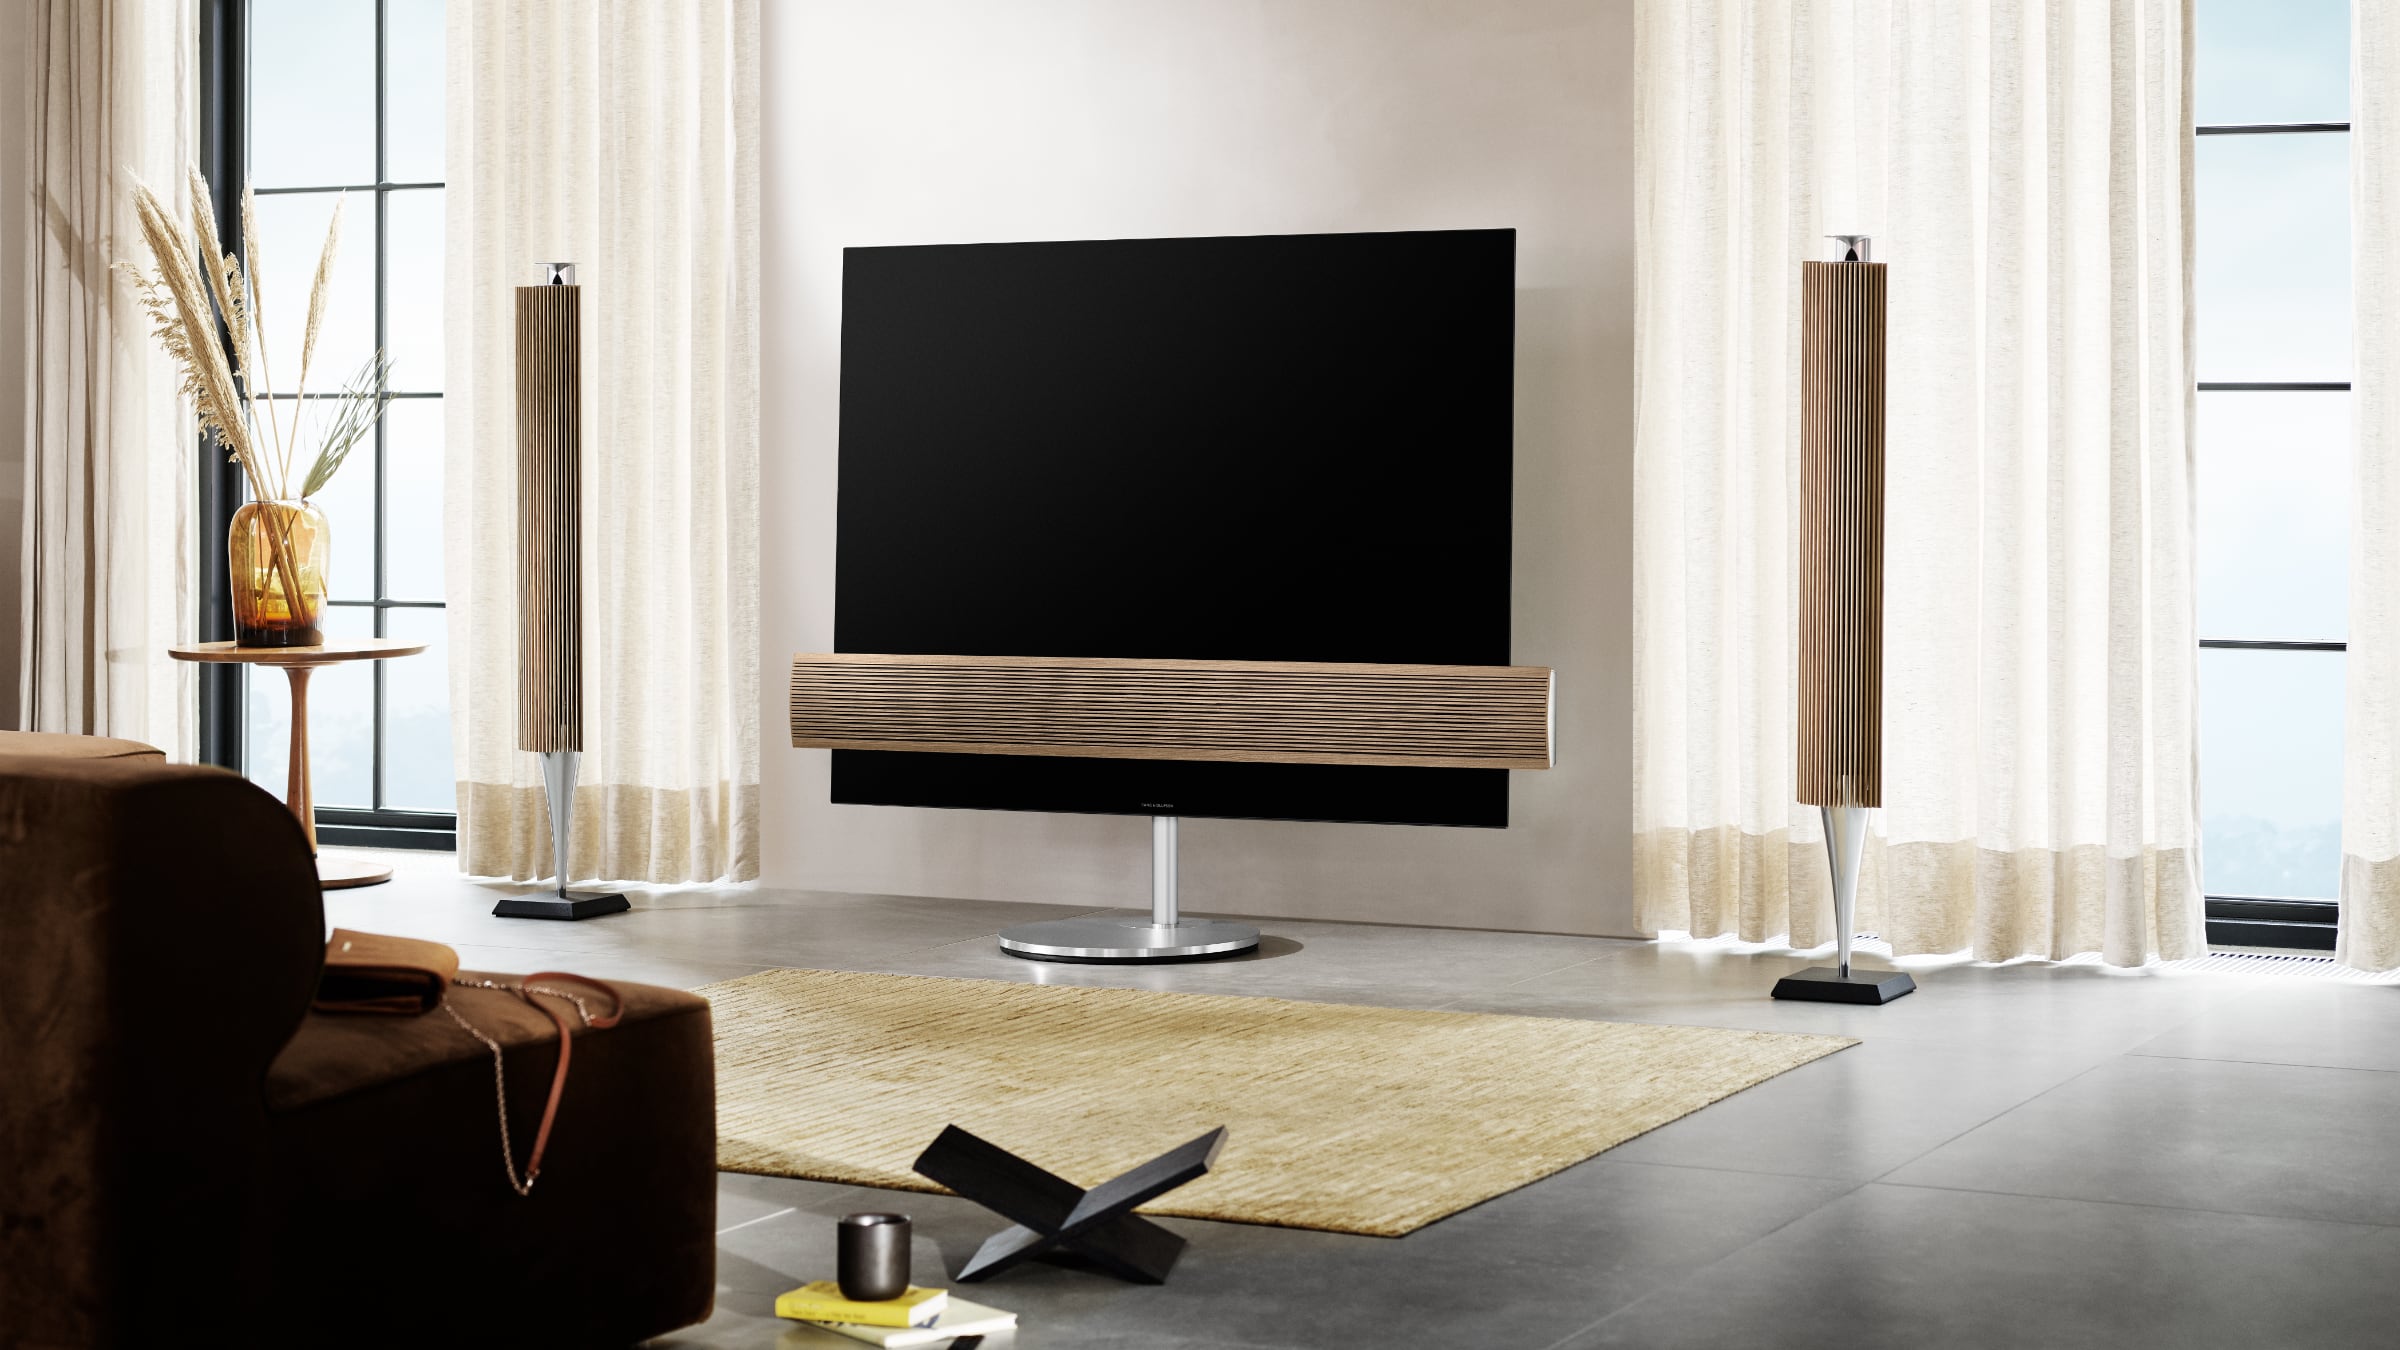 B&O launches upgraded Beovision Eclipse OLED TV -